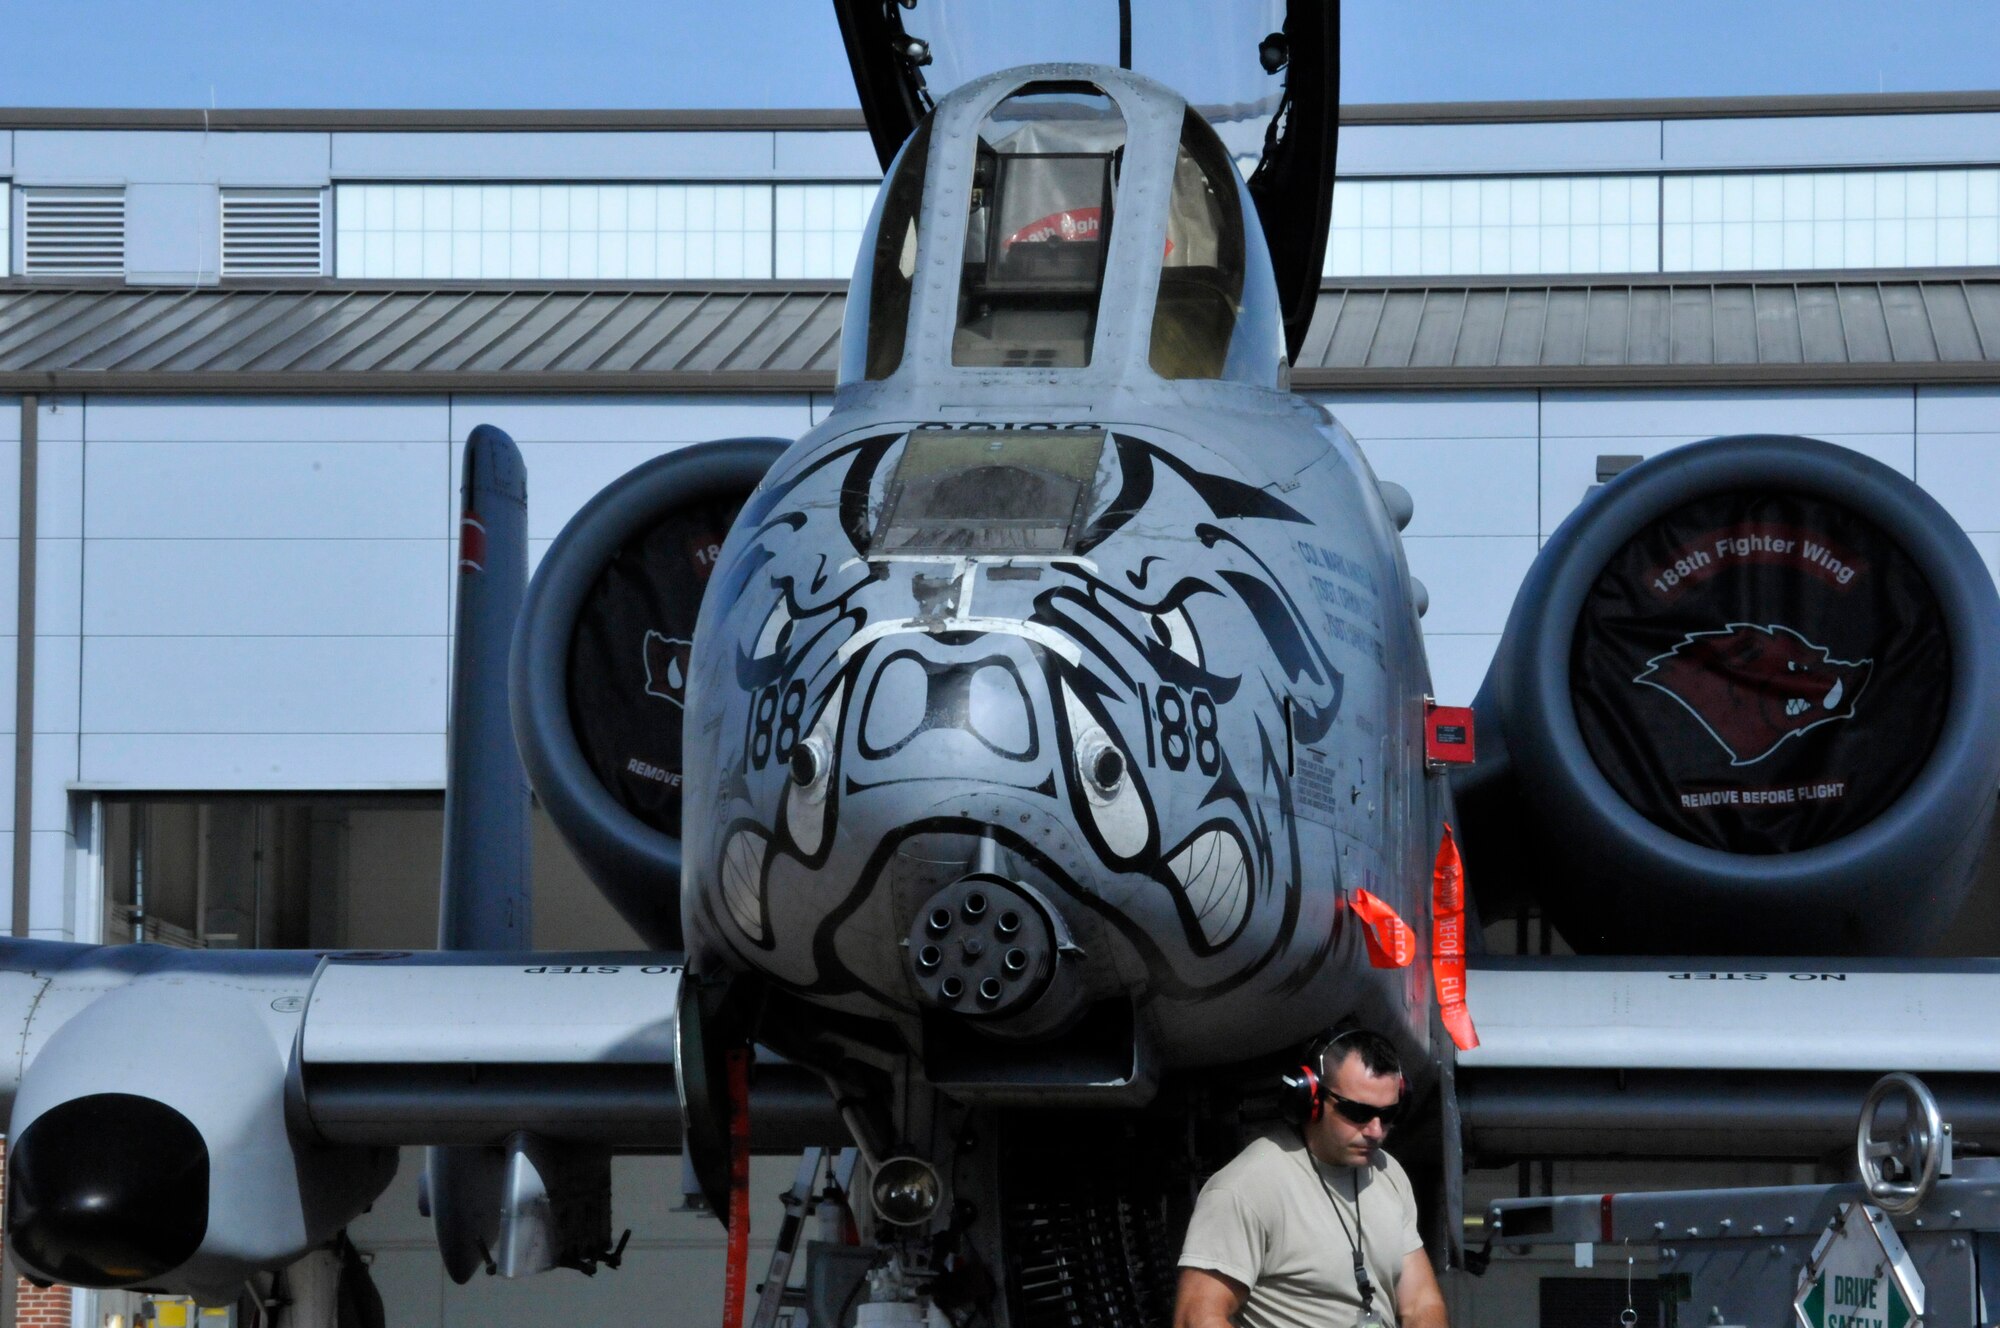 Master Sgt. Travis Black of the 188th Aircraft Maintenance Squadron’s Weapons Element helps conduct the last 30mm Gatling gun download on an A-10C Thunderbolt II “Warthog” aircraft at Ebbing Air National Guard Base, Fort Smith, Arkansas, May 19, 2014. The unit is currently converting from a fighter mission to a remotely piloted aircraft, intelligence, reconnaissance, surveillance and reconnaissance mission. The last two aircraft will leave during the June 7, 2014. (U.S. Air National Guard photo by Tech. Sgt. Josh Lewis/released) 